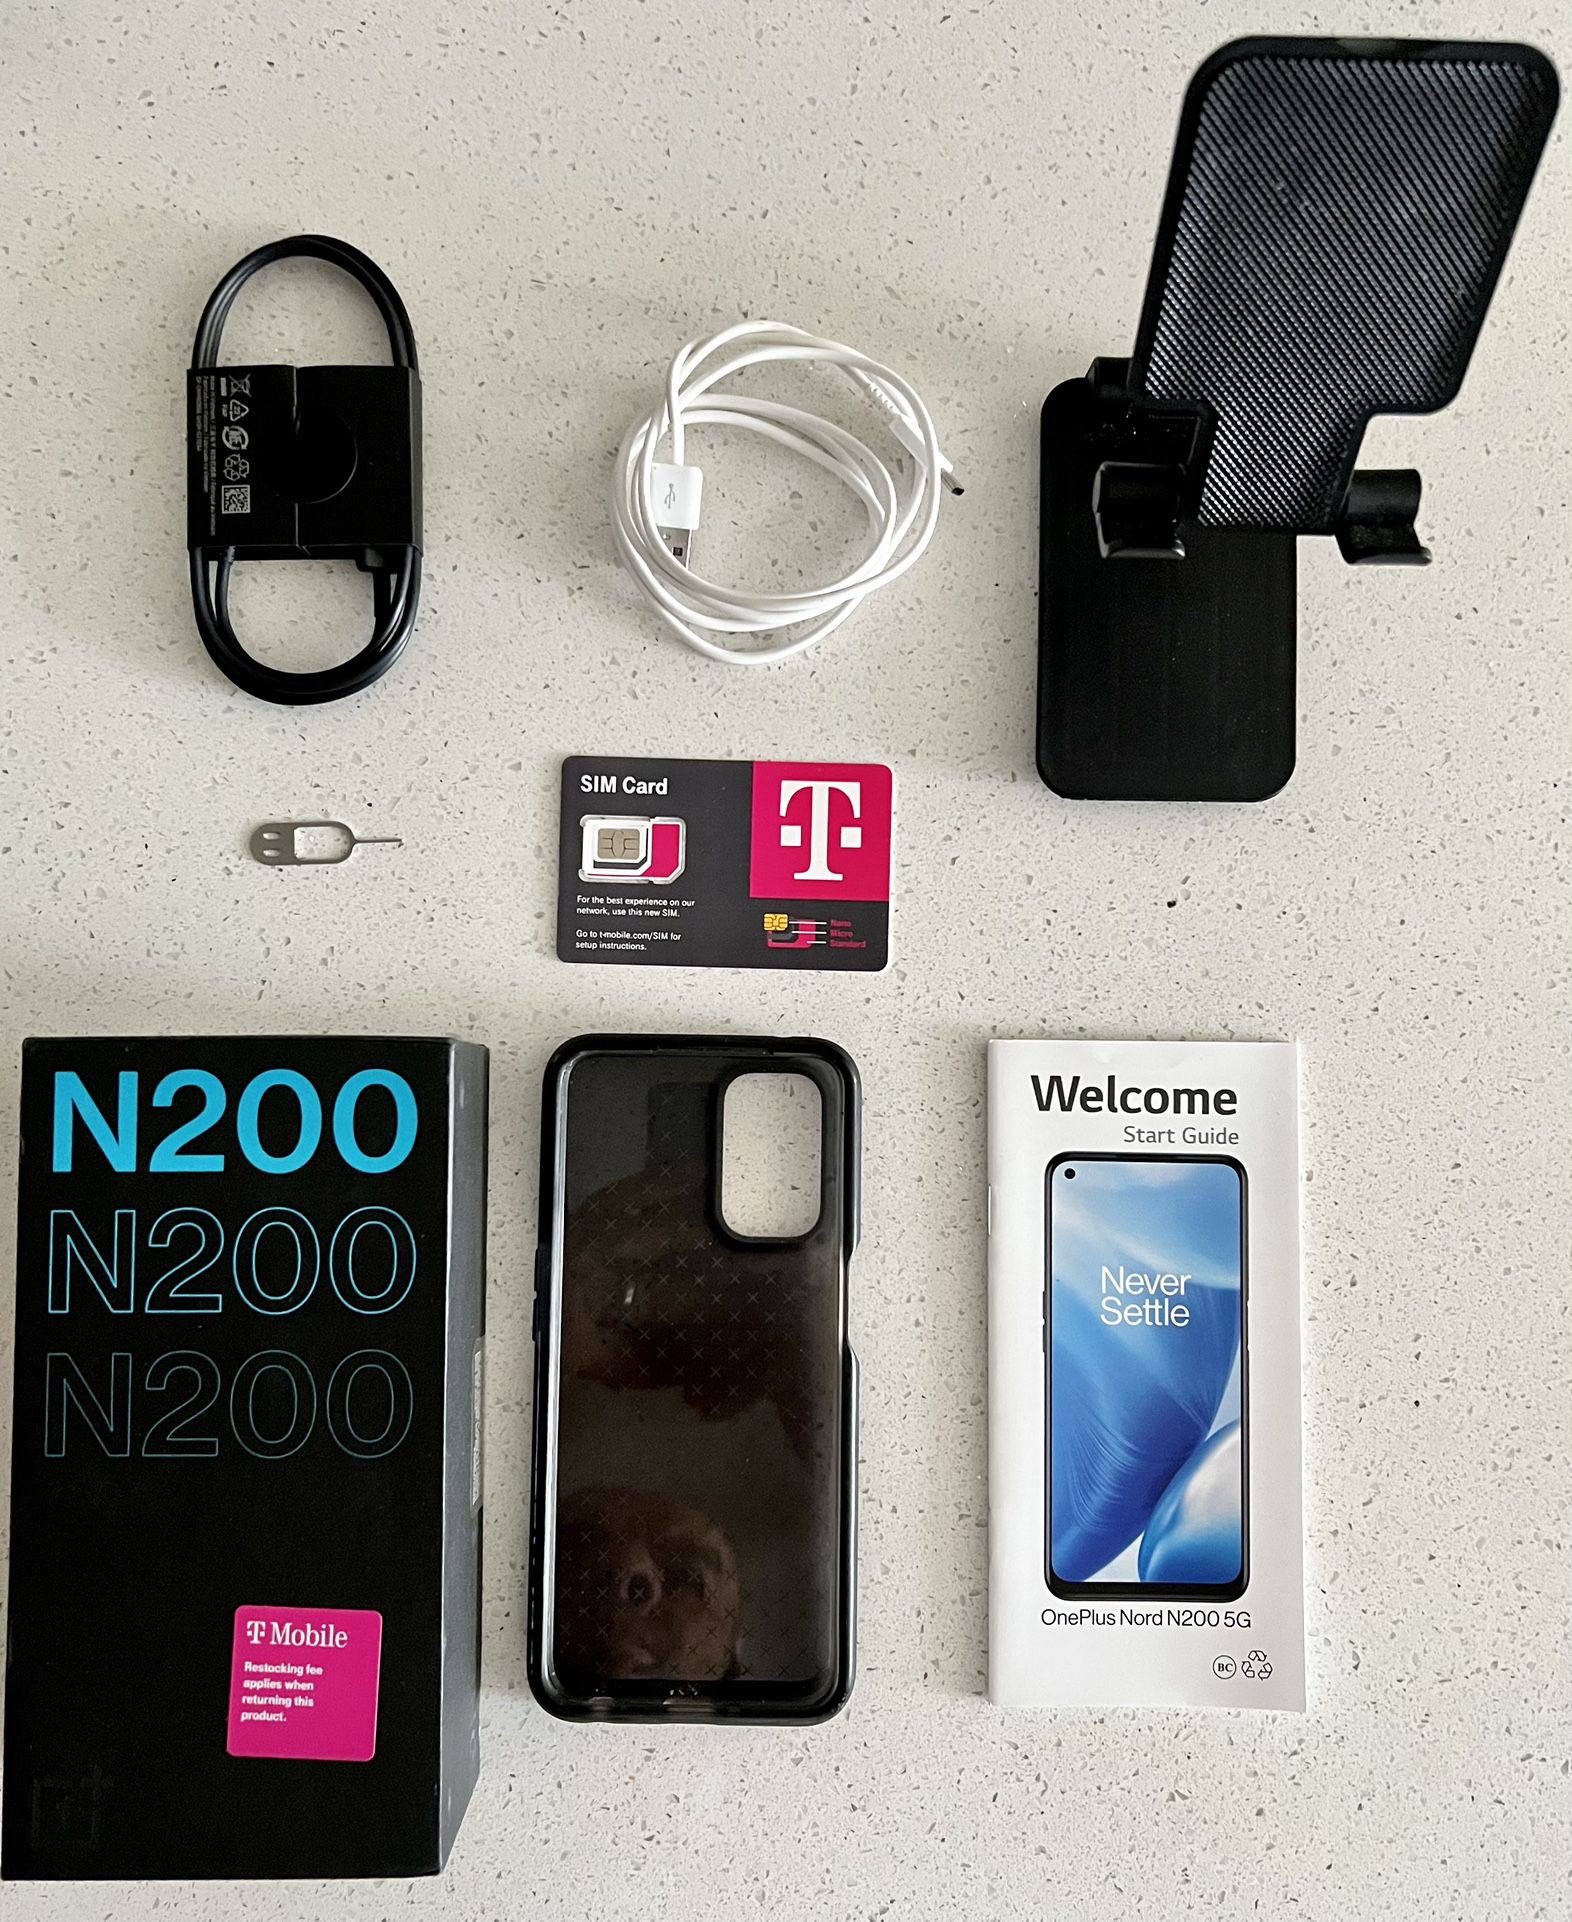 One Plus N200 / T-mobile